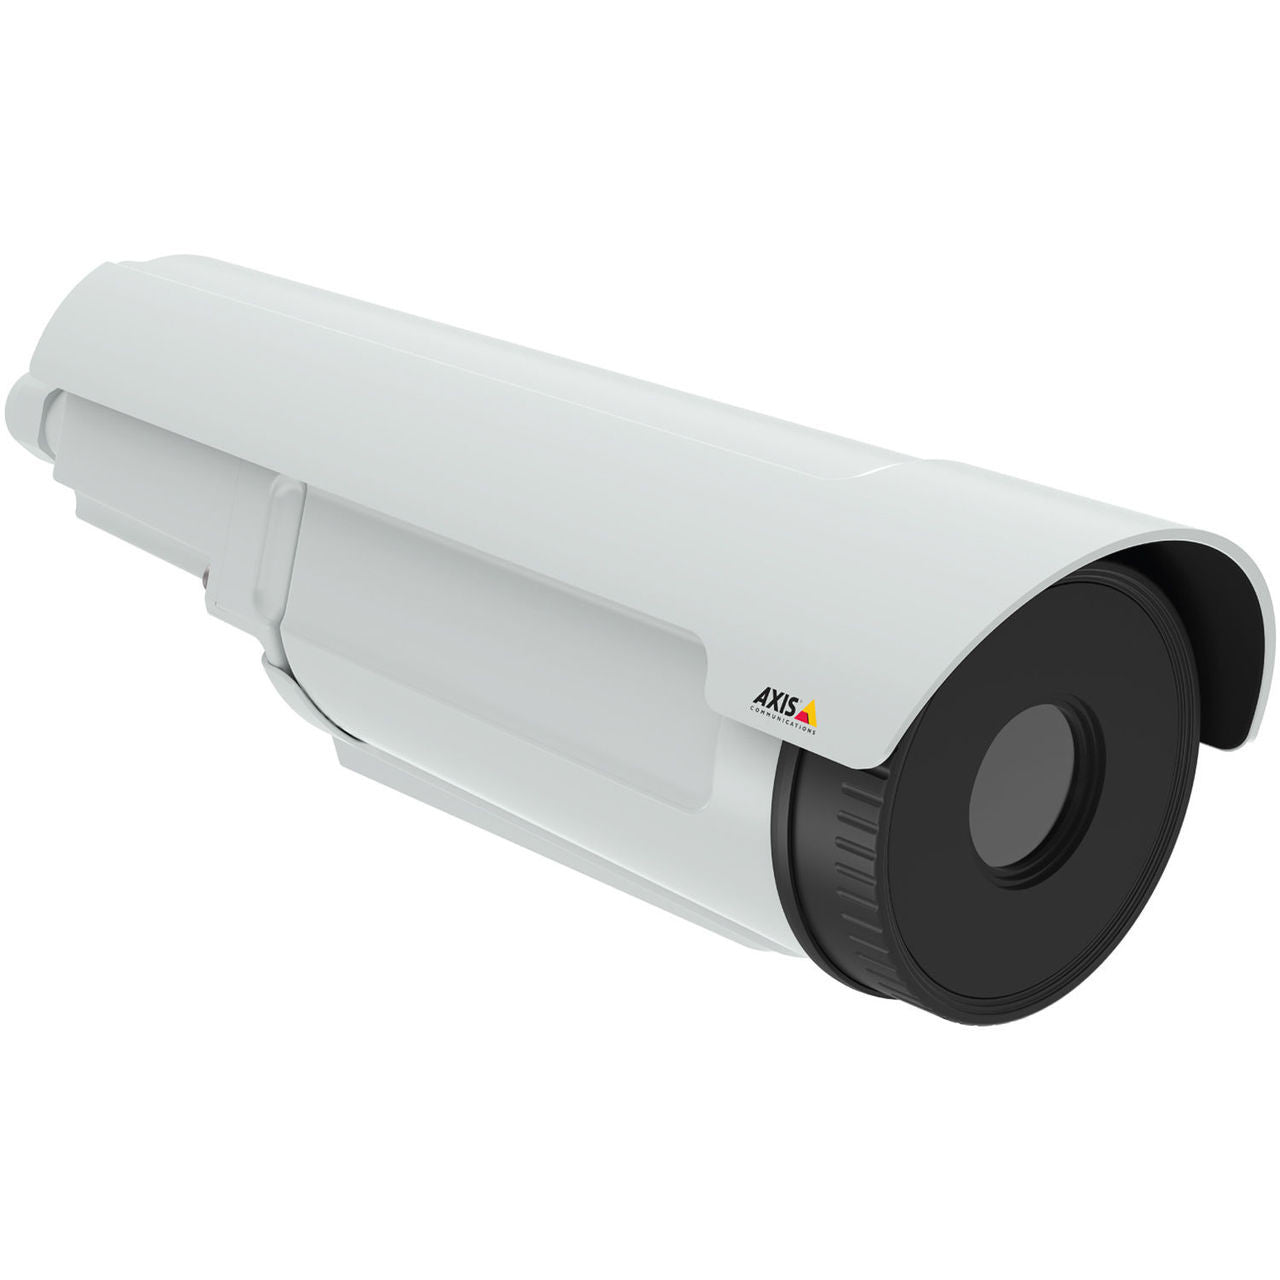 AXIS Q1941-E PT Mount (0977-001) 60mm 30fps Thermal Network Camera